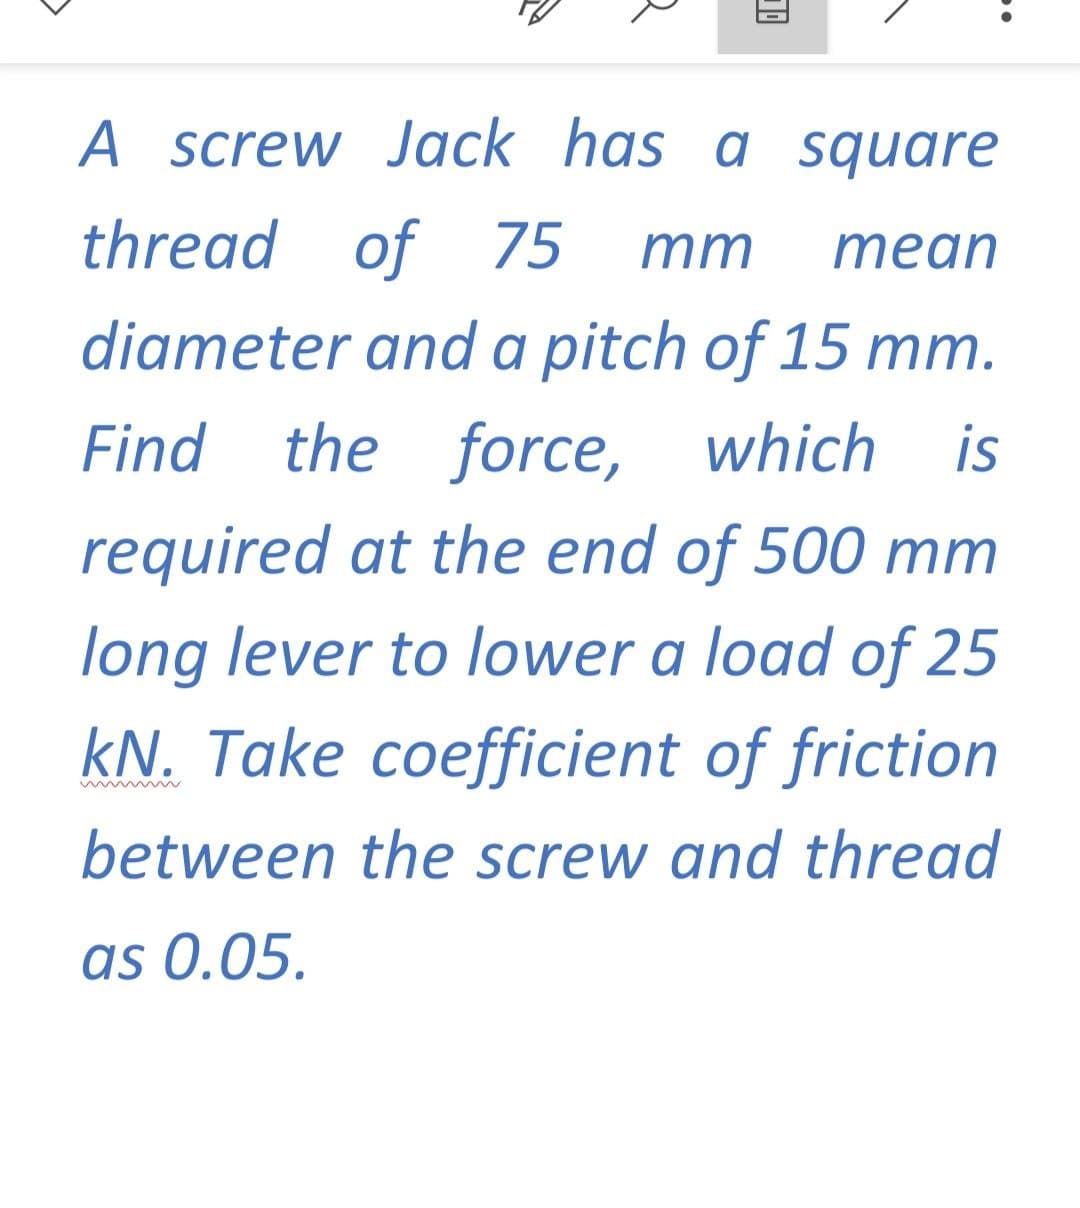 A screw Jack has a square
thread of 75
mm
mean
diameter and a pitch of 15 mm.
Find the force, which is
required at the end of 500 mm
long lever to lower a load of 25
kN. Take coefficient of friction
between the screw and thread
as 0.05.
